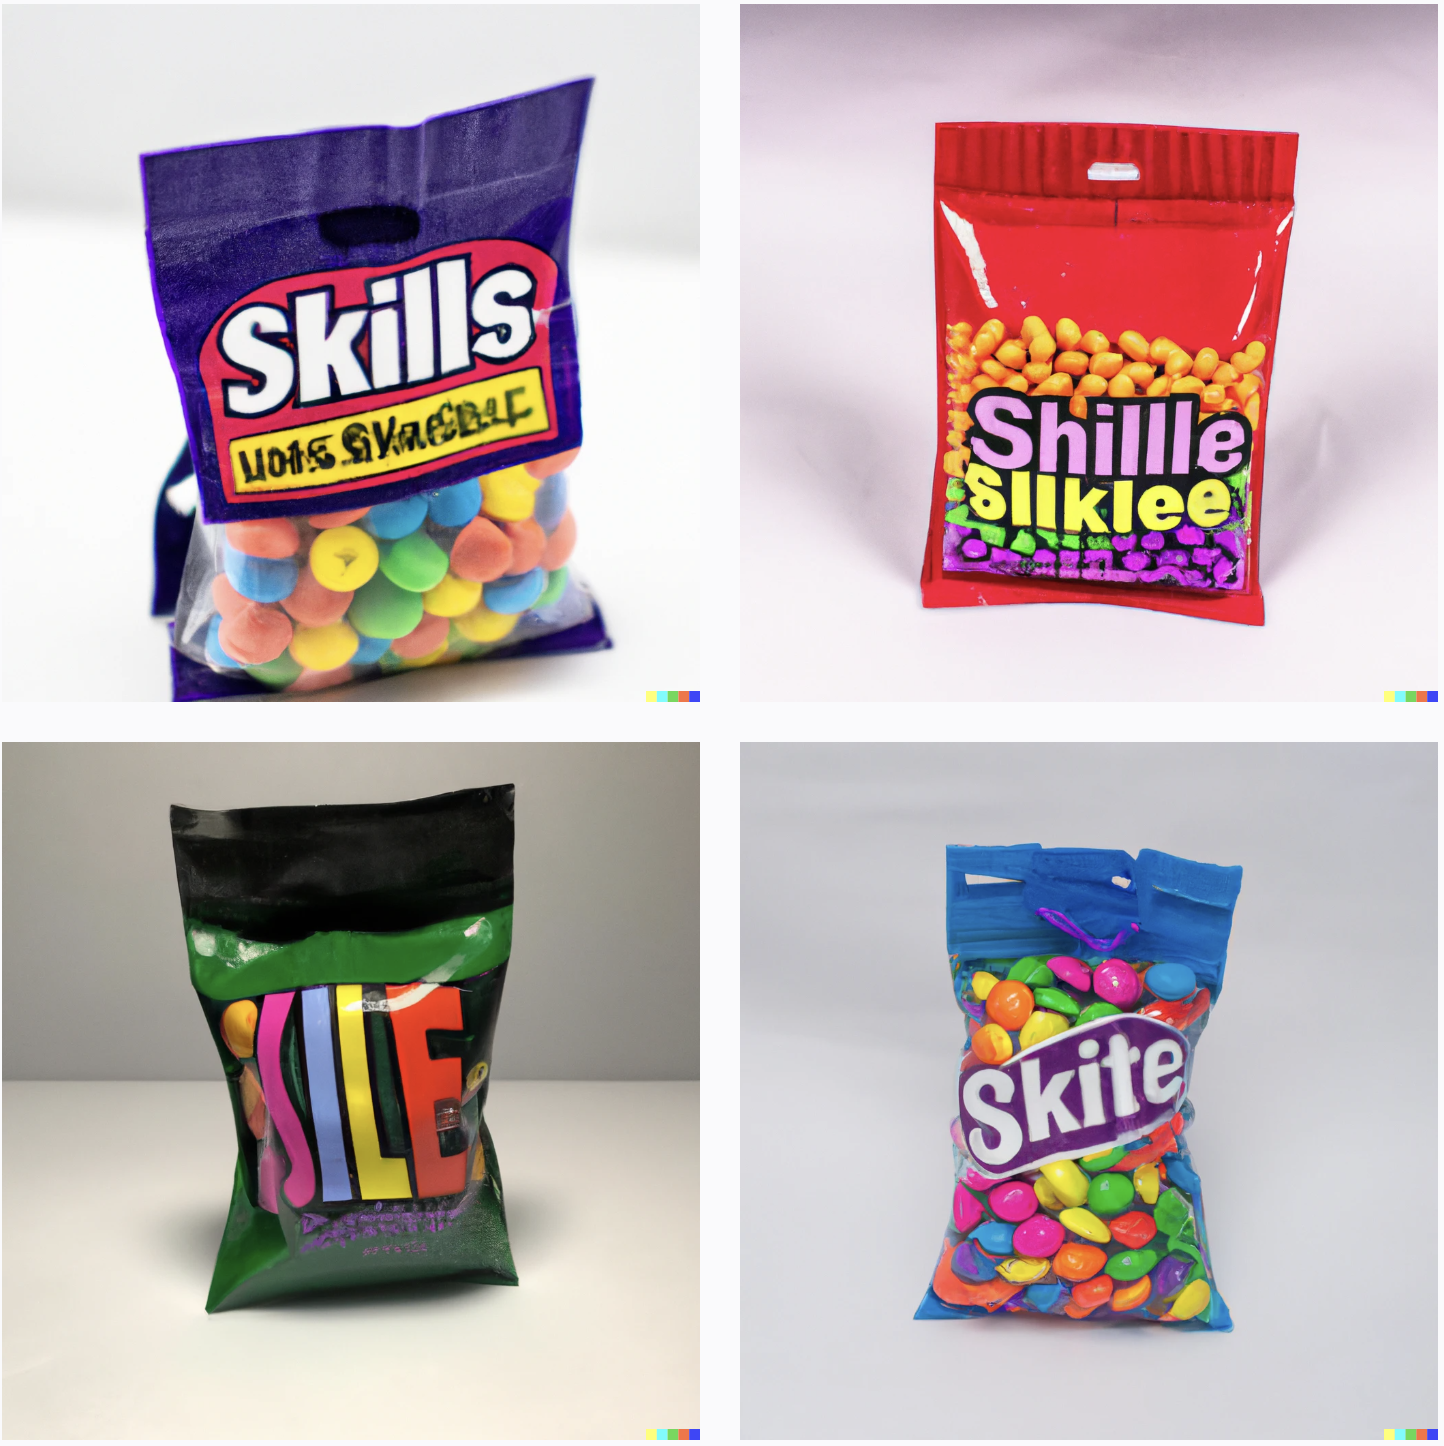 Bags of round candies, most of which are either much too large or much too small to be skittles. Labels read "Skills", "Sile", "Shillle", "Sllklee", and "Skite".